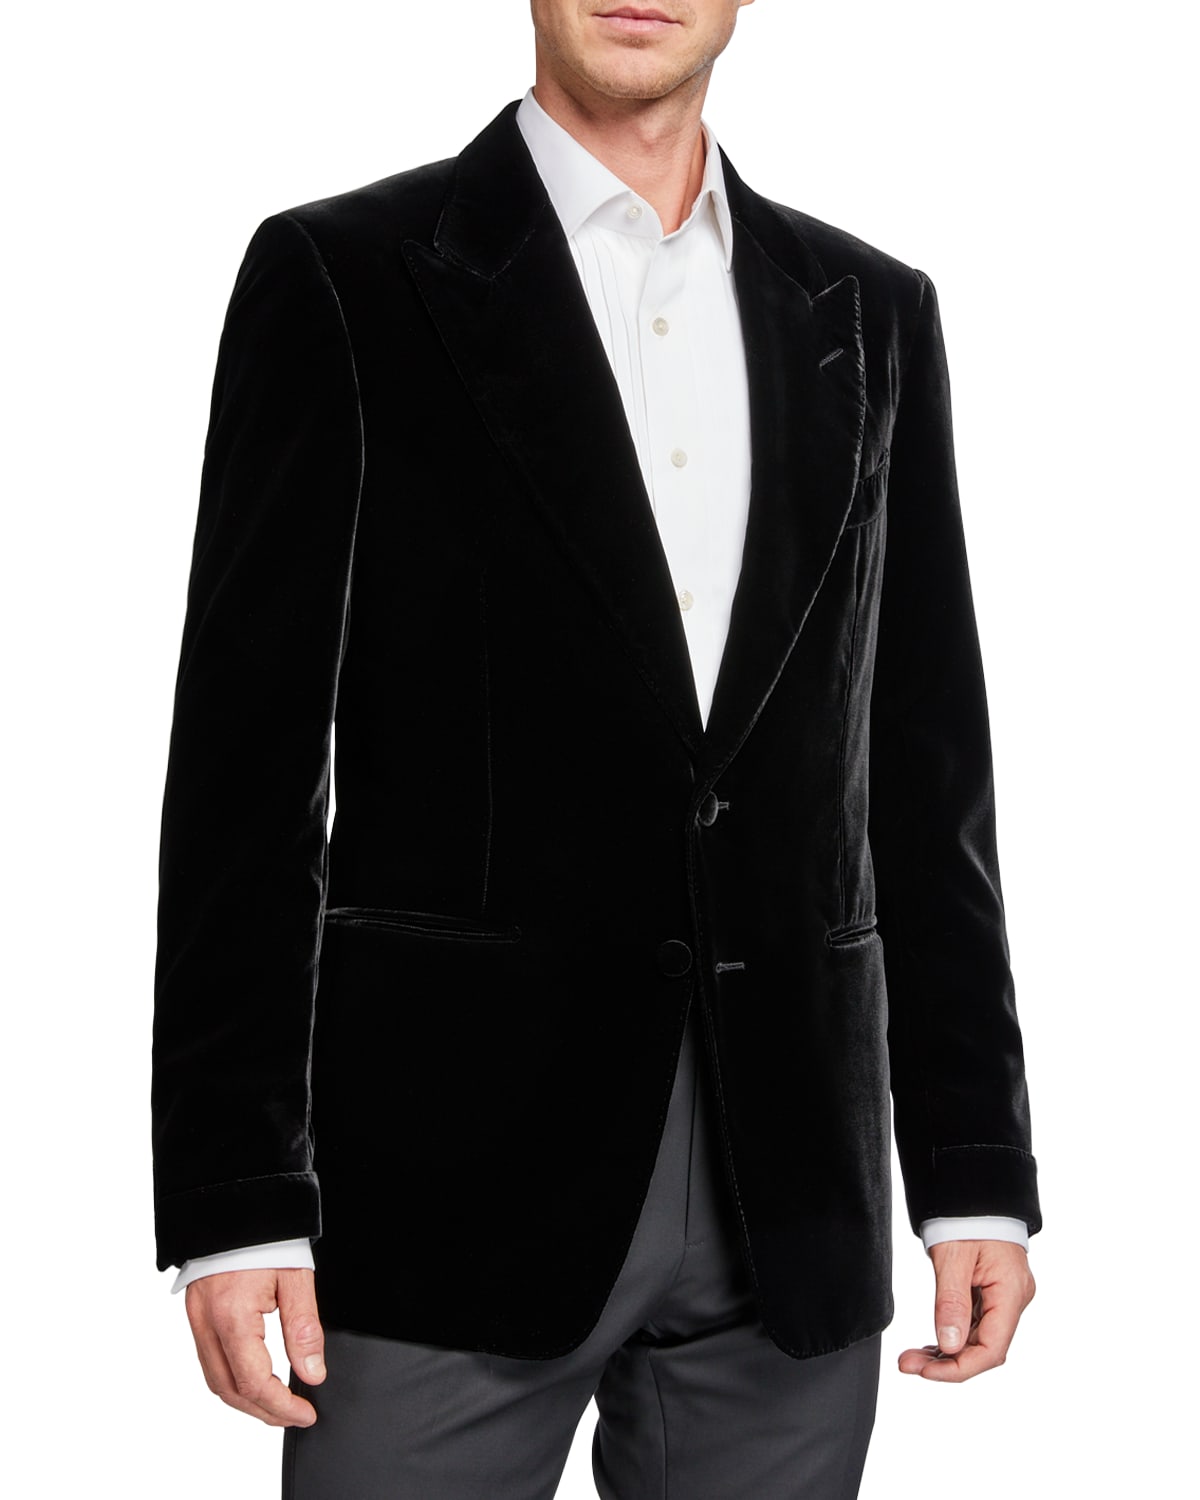 Tom Ford Mens Outerwear | Neiman Marcus